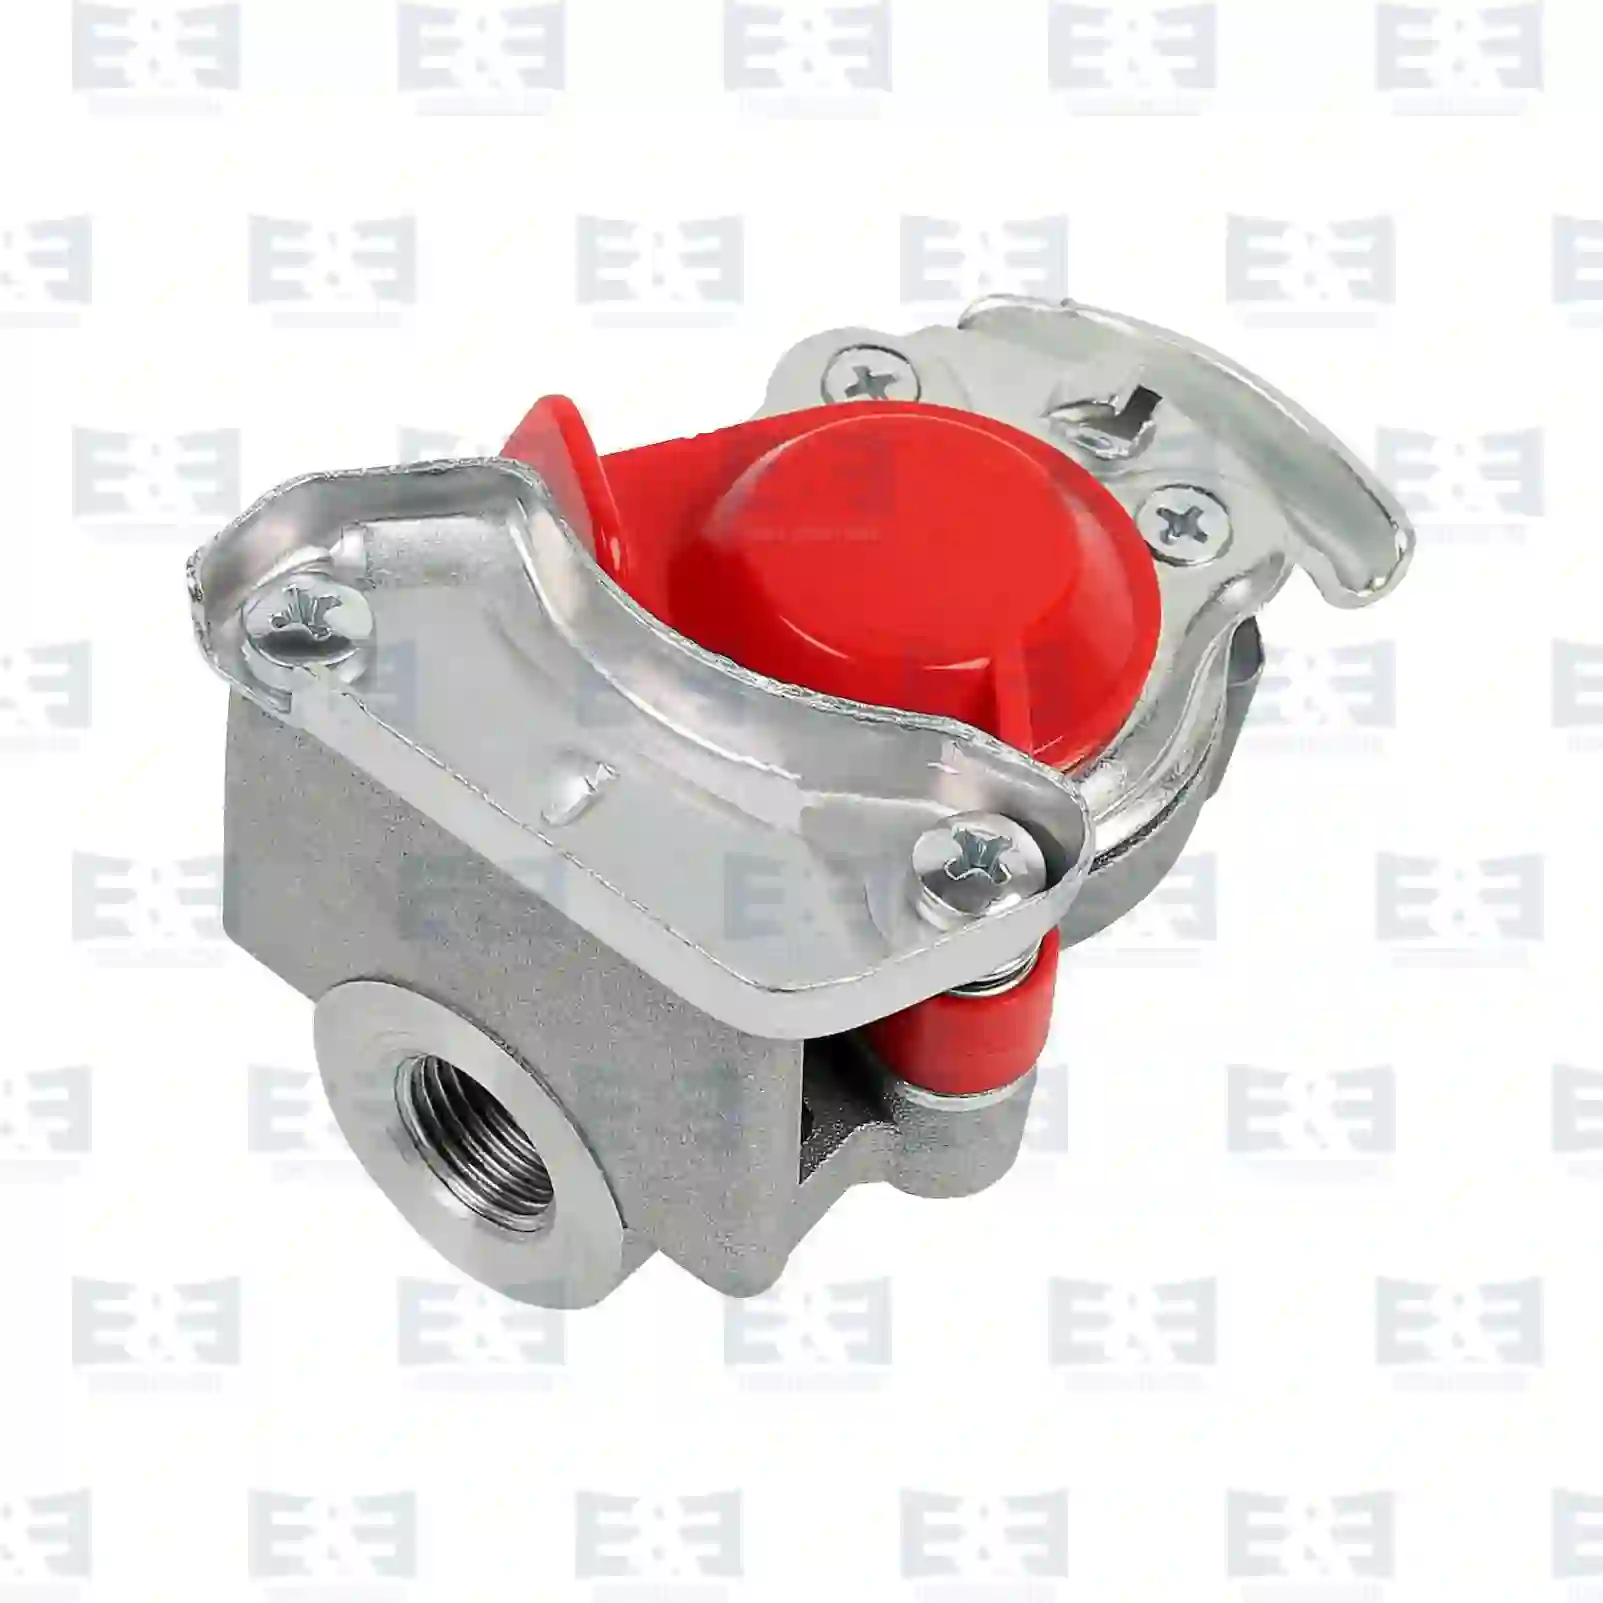 Palm Coupling Palm coupling, red lid, EE No 2E2296691 ,  oem no:0218240300, 1506435, ACU8711, 150881, 41035633, 5006210386, 60135772, 61259650, 500945012, 945012, 502925901, 502965108, 502998401, 81512206049, 81512206072, 81512206075, 81512206115, 81512206134, 0004297630, 0004297730, 011017295, 110172950, 110229700, F001017, 0037534600, 5000095034, 5000608011, 5021170409, 4425012100, 1112485, 20167485, 330301, 051424, 8285191000, ZG50552-0008 E&E Truck Spare Parts | Truck Spare Parts, Auotomotive Spare Parts